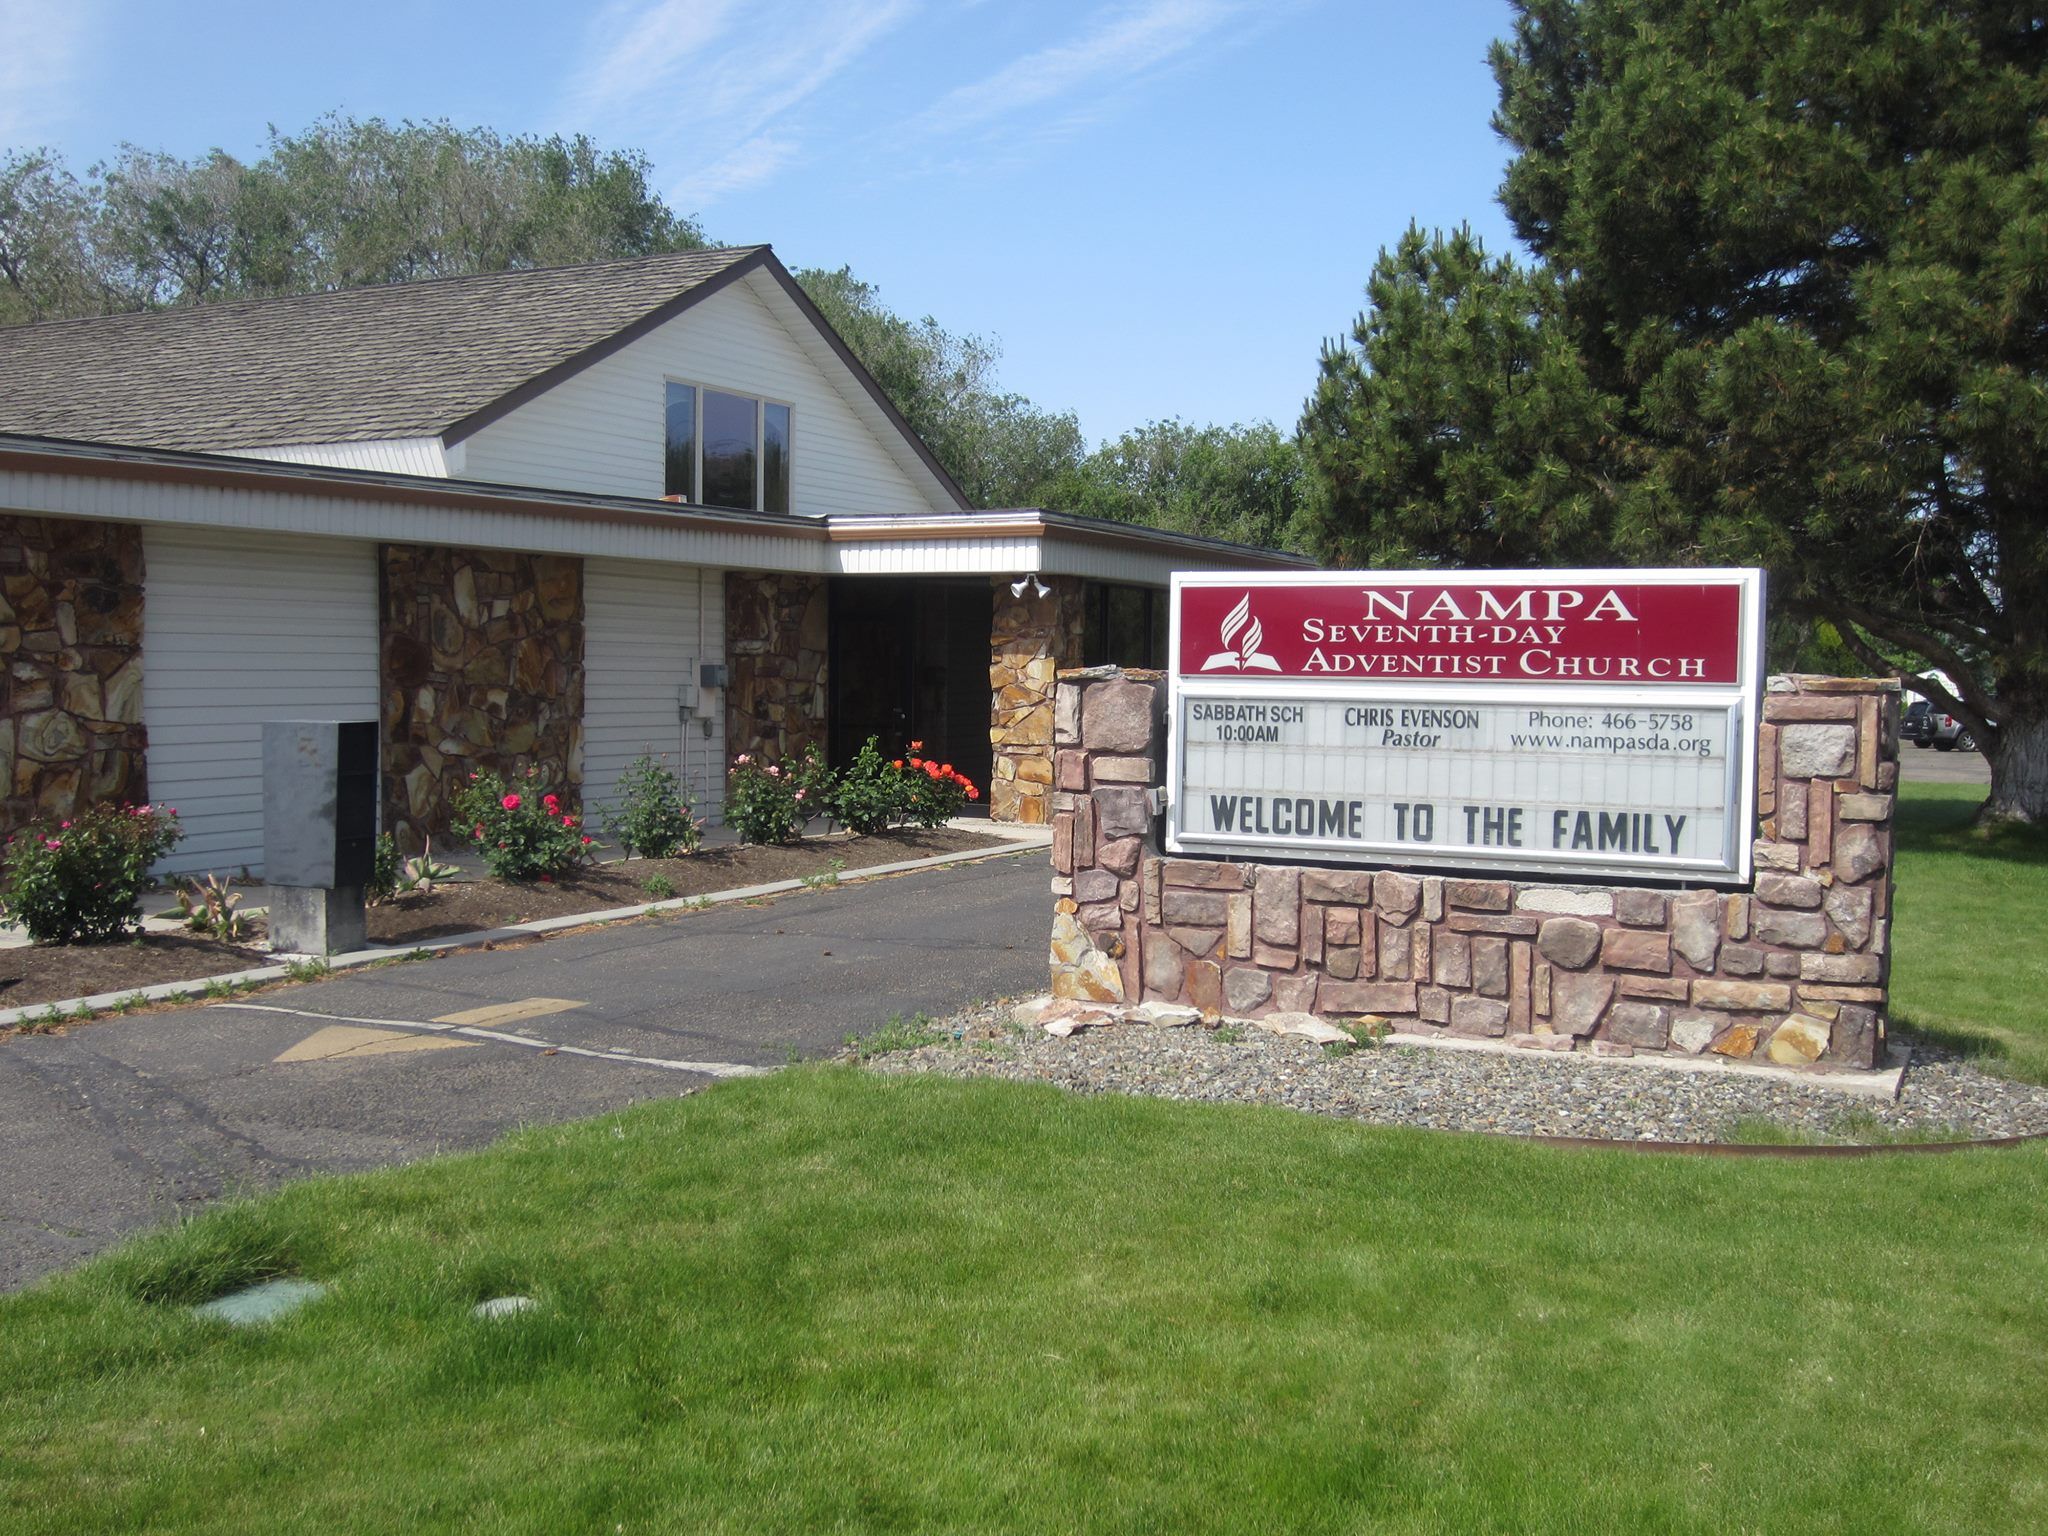 Seventh-Day Adventist Community Services Center